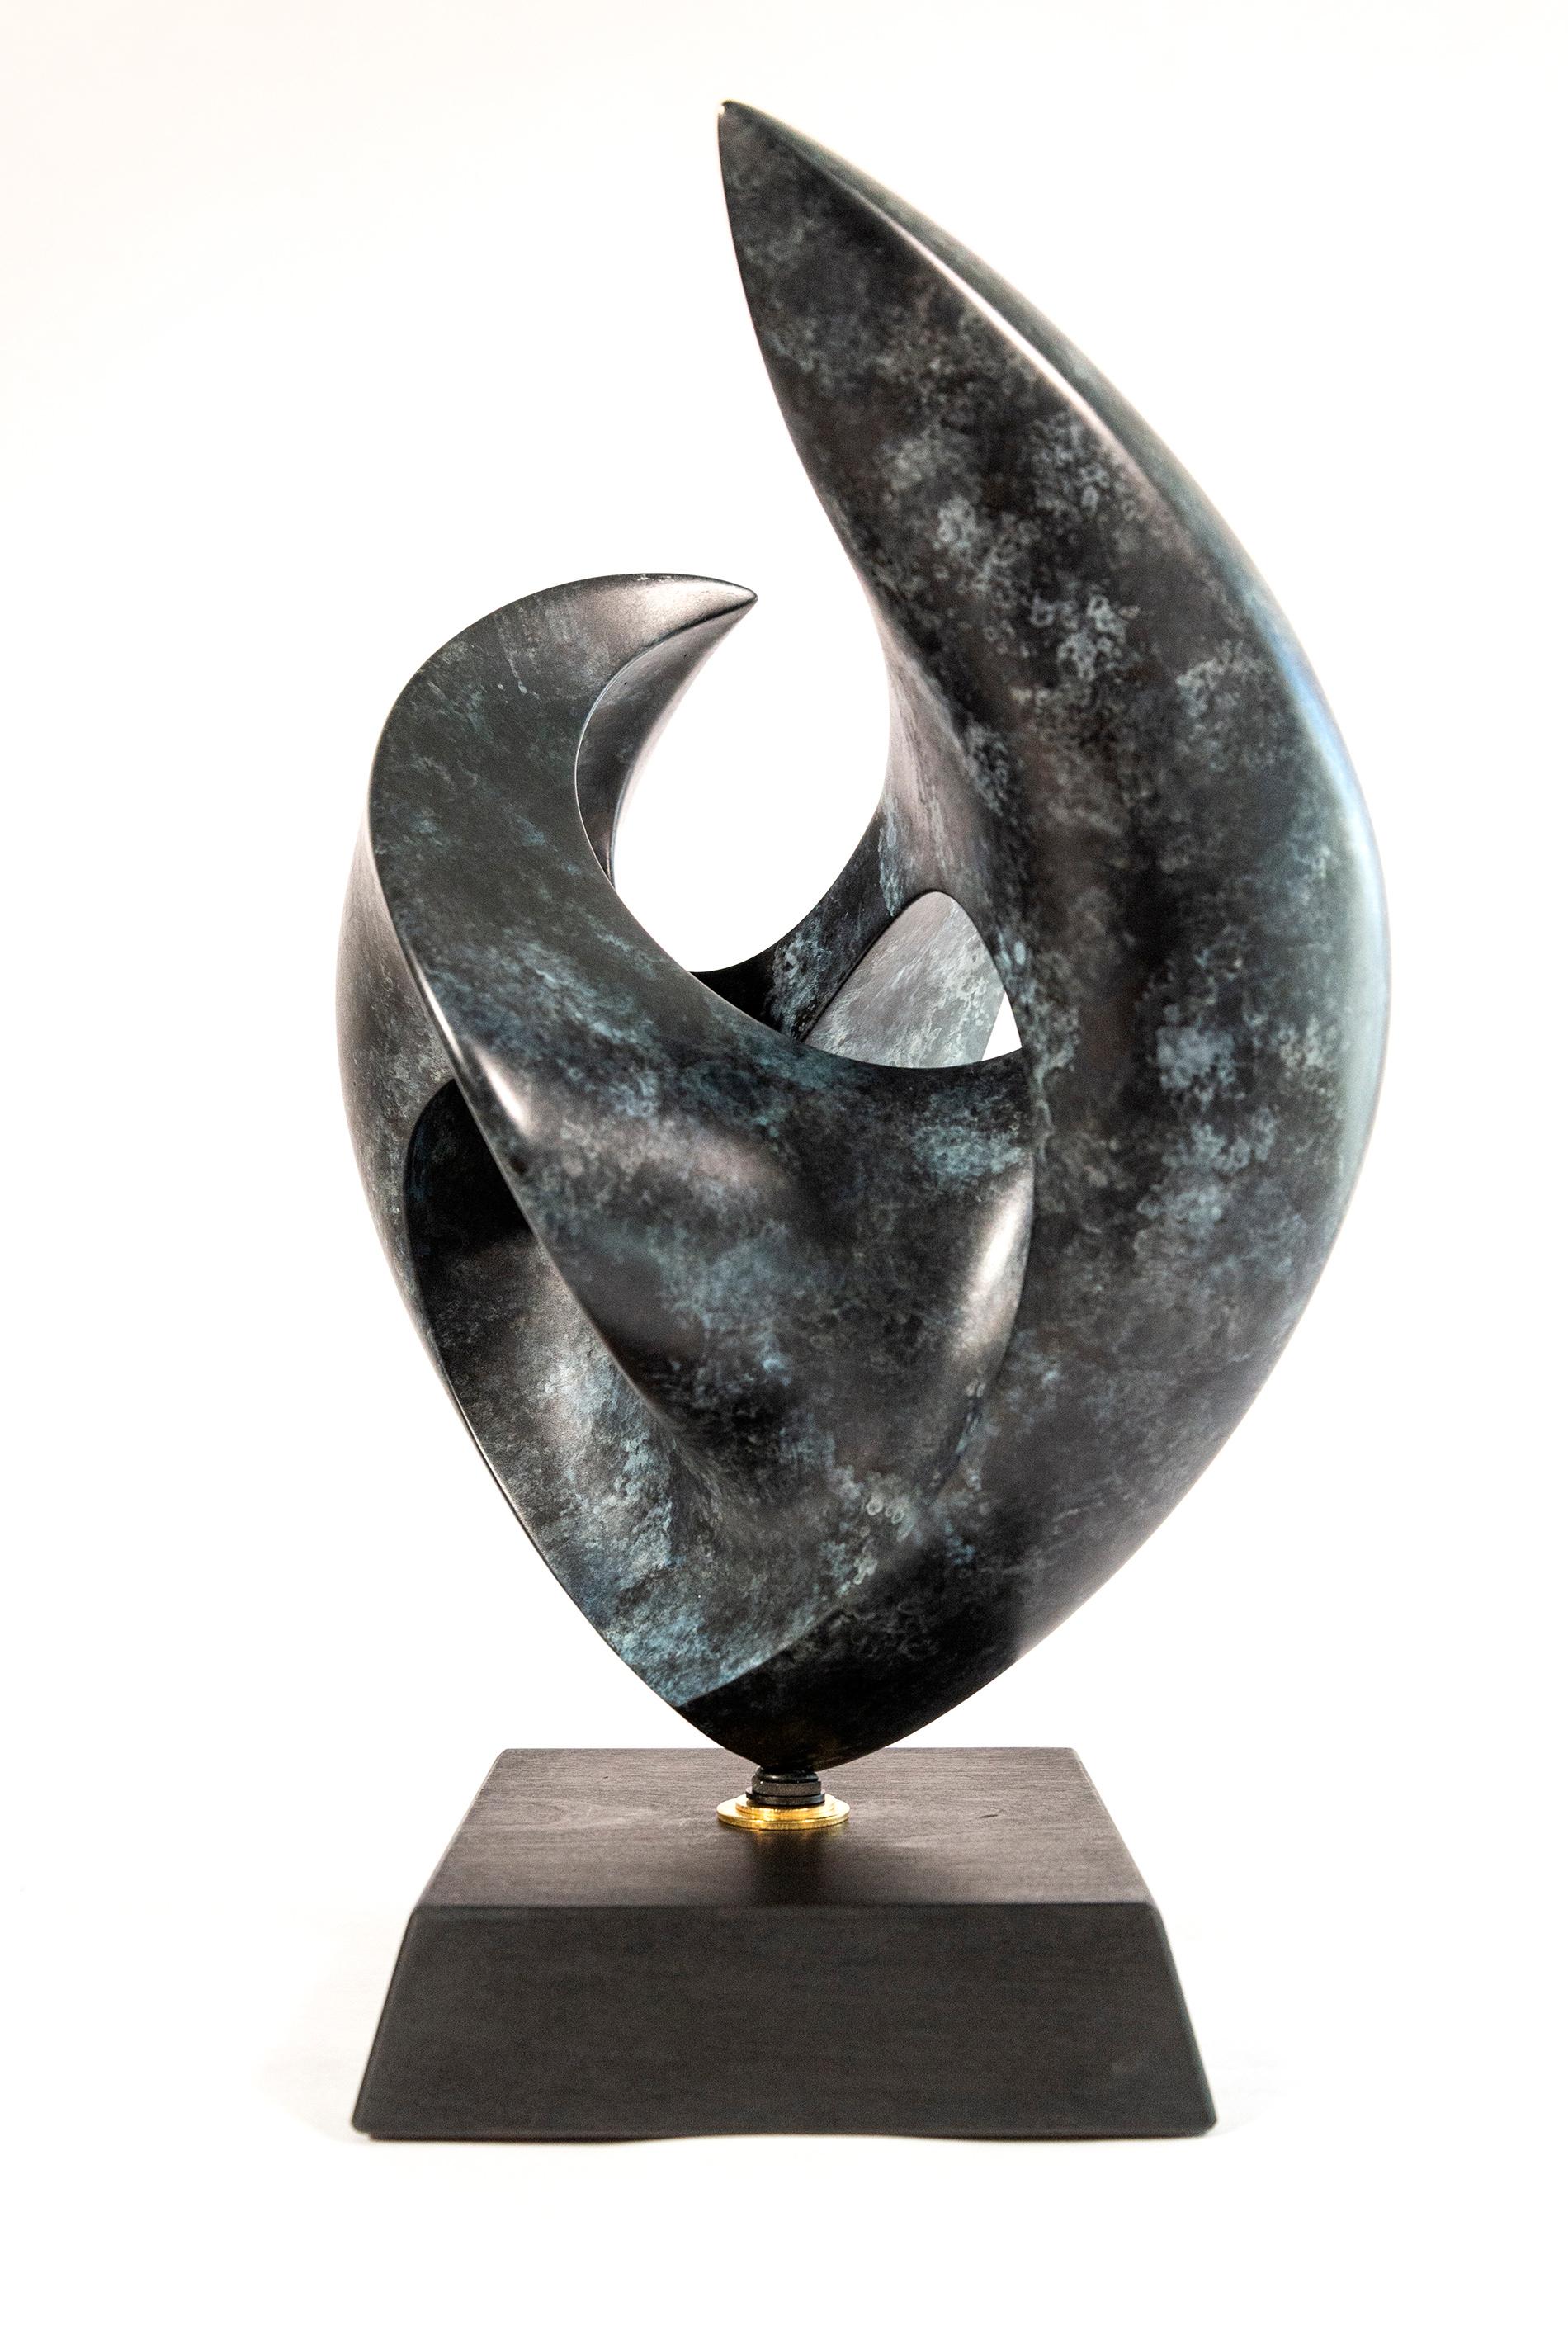 Rhapsody Ed. 1/15 - smooth, polished, abstract, bronze and mahogany sculpture - Sculpture by David Chamberlain